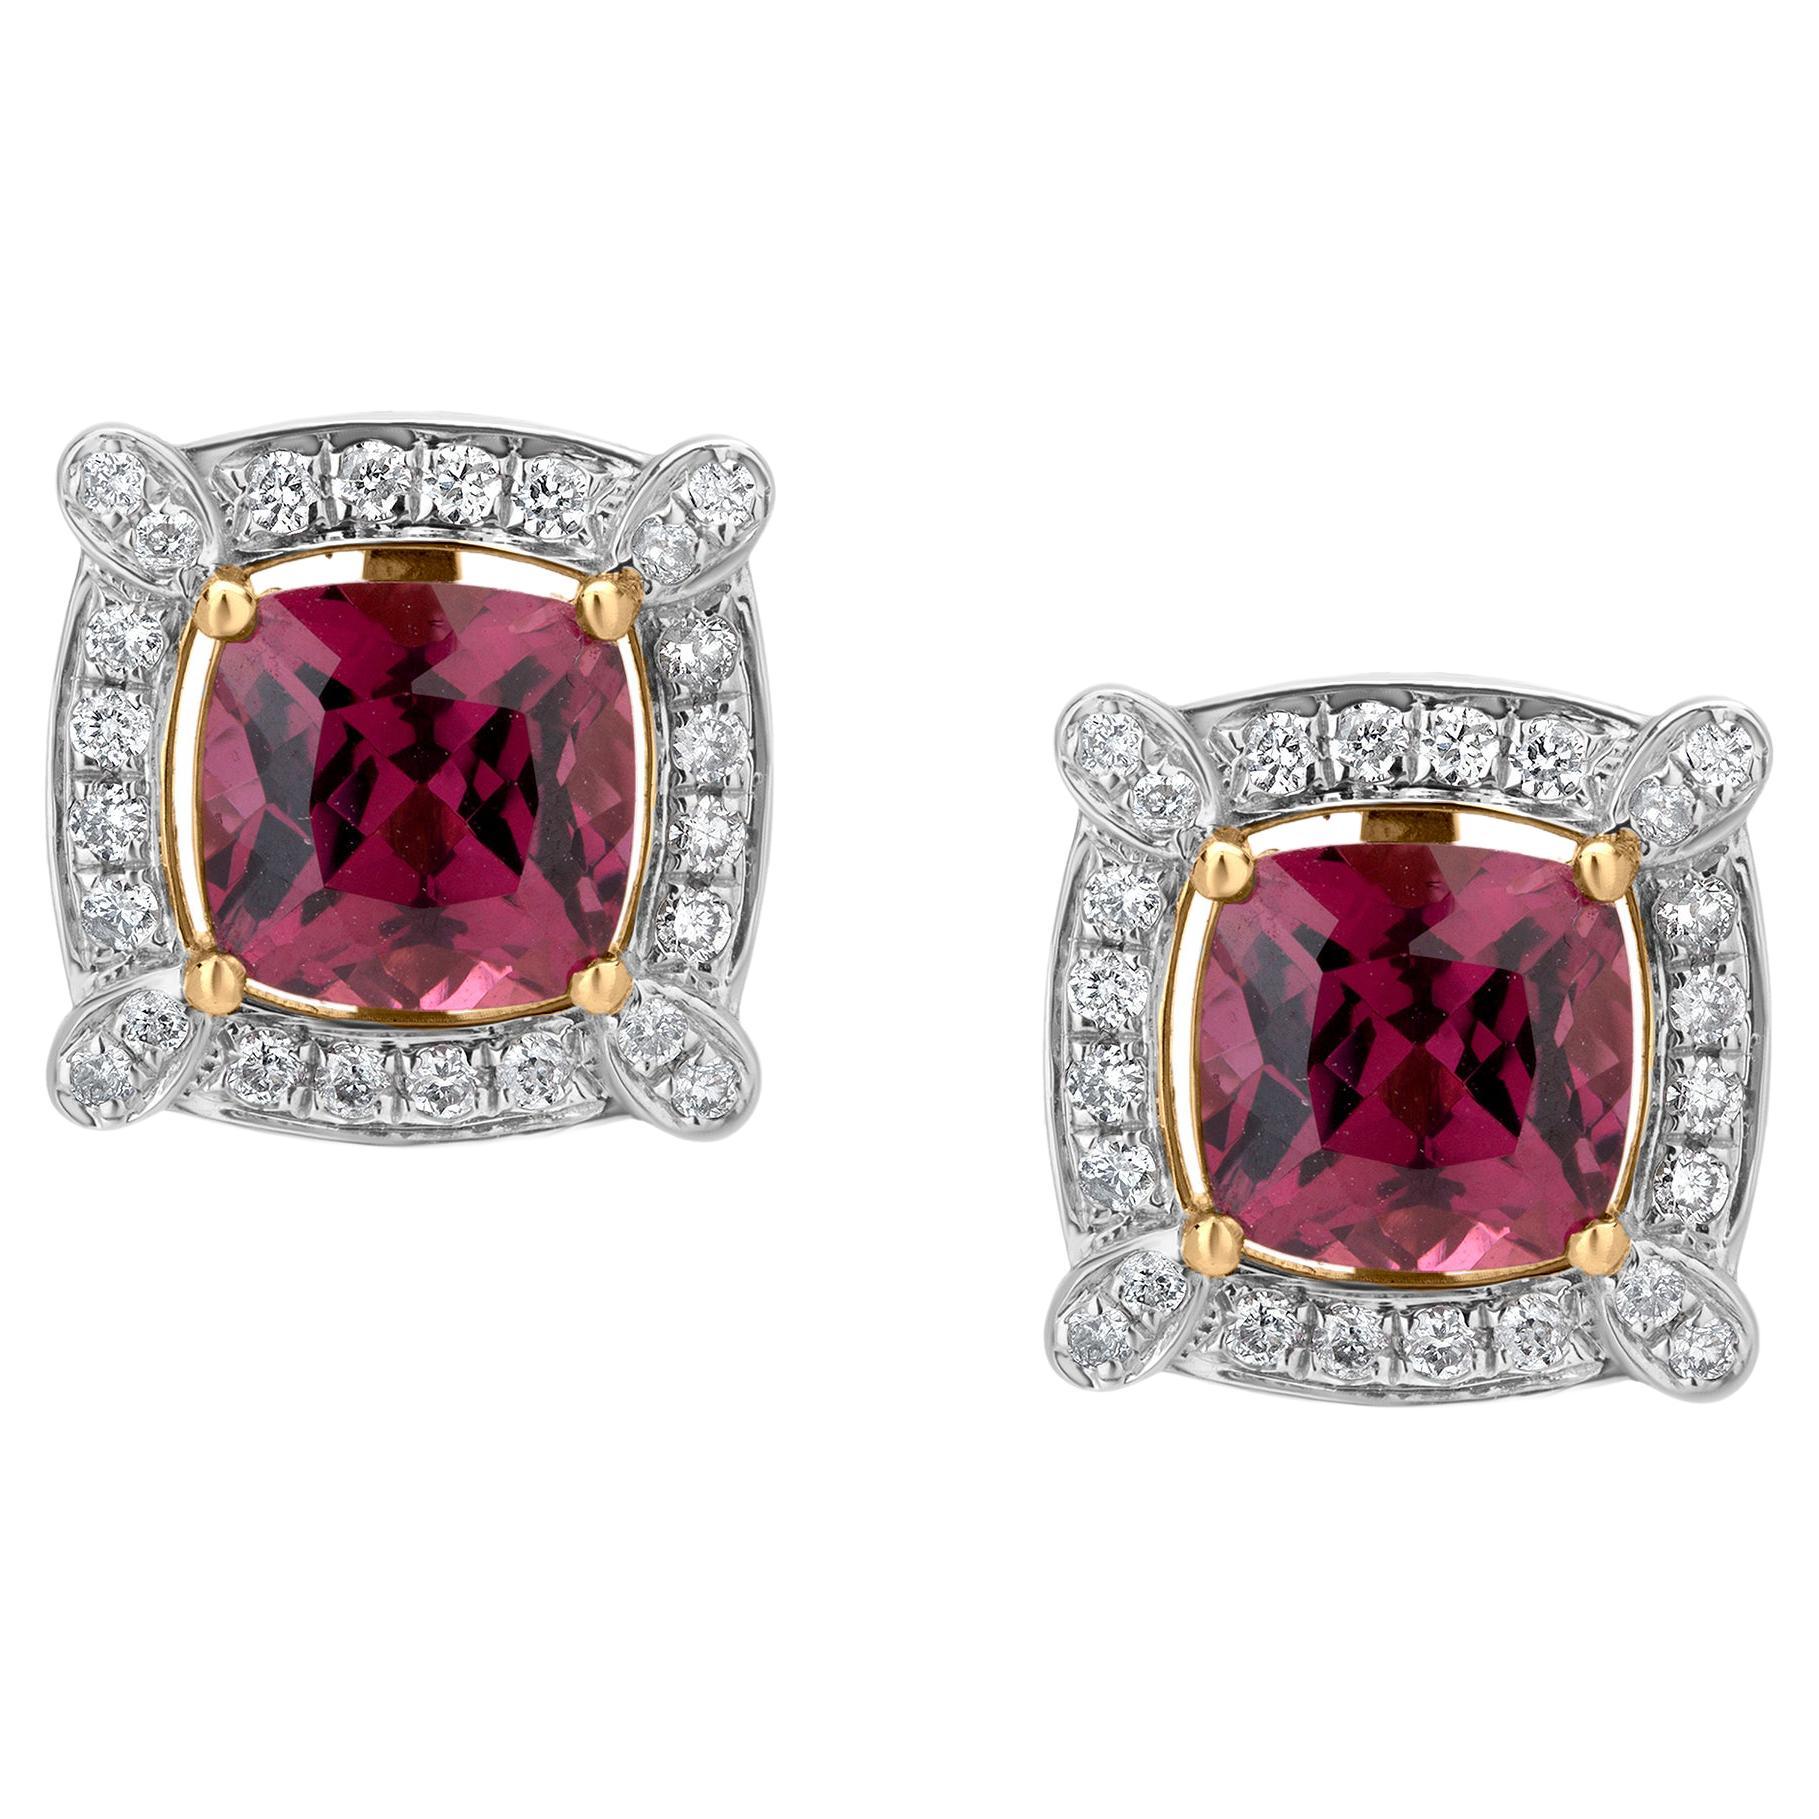 Gemistry 2.94cttw Diamond Pave and Pink Garnet Prong Halo Stud Earrings For Sale